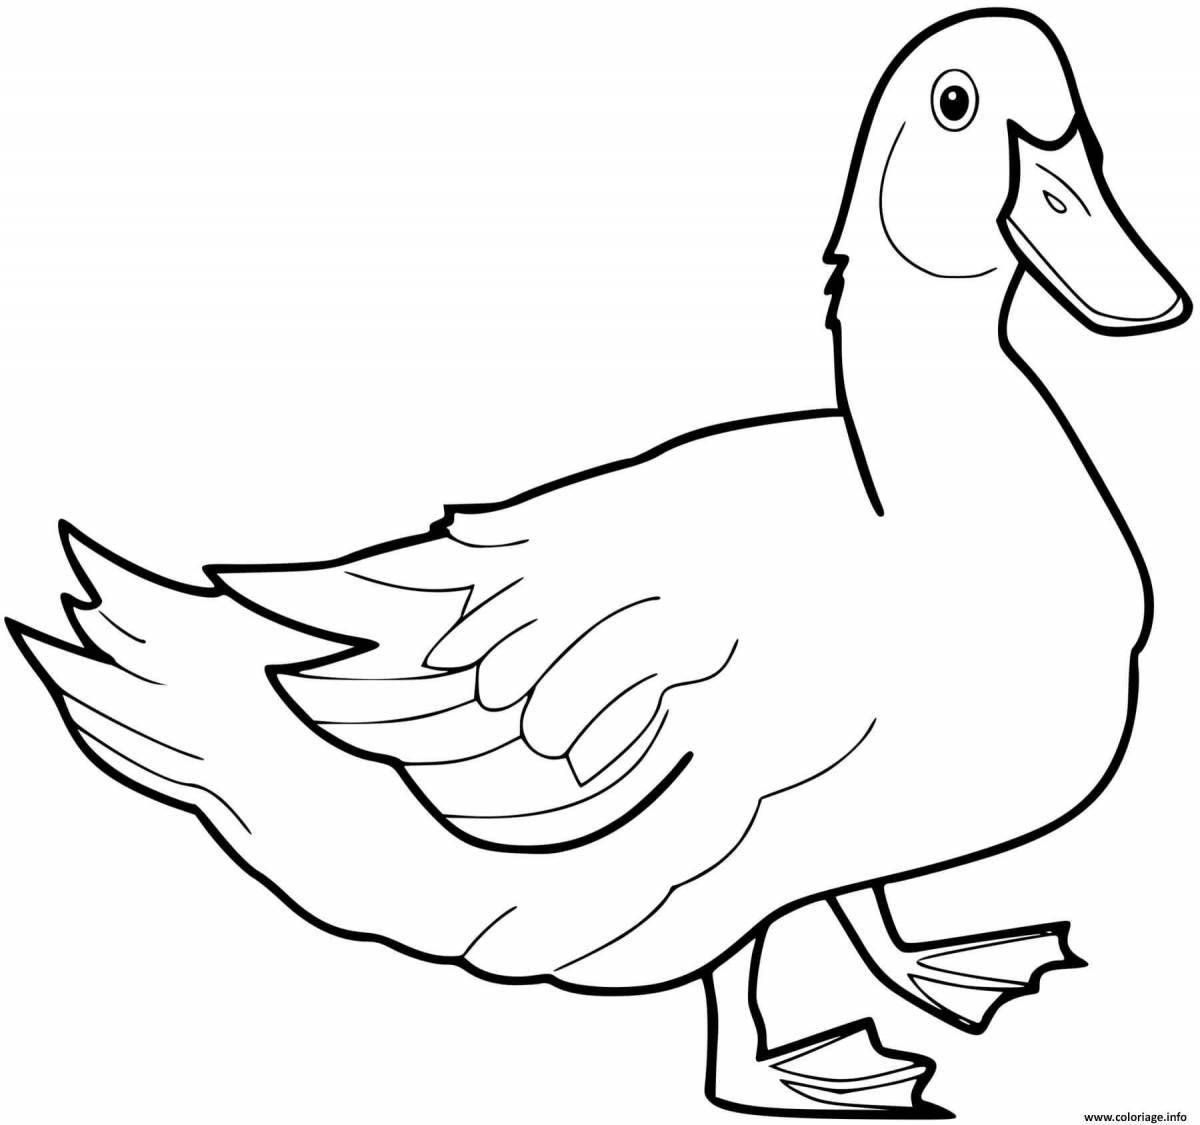 Lalafanfan duck coloring page filled with color